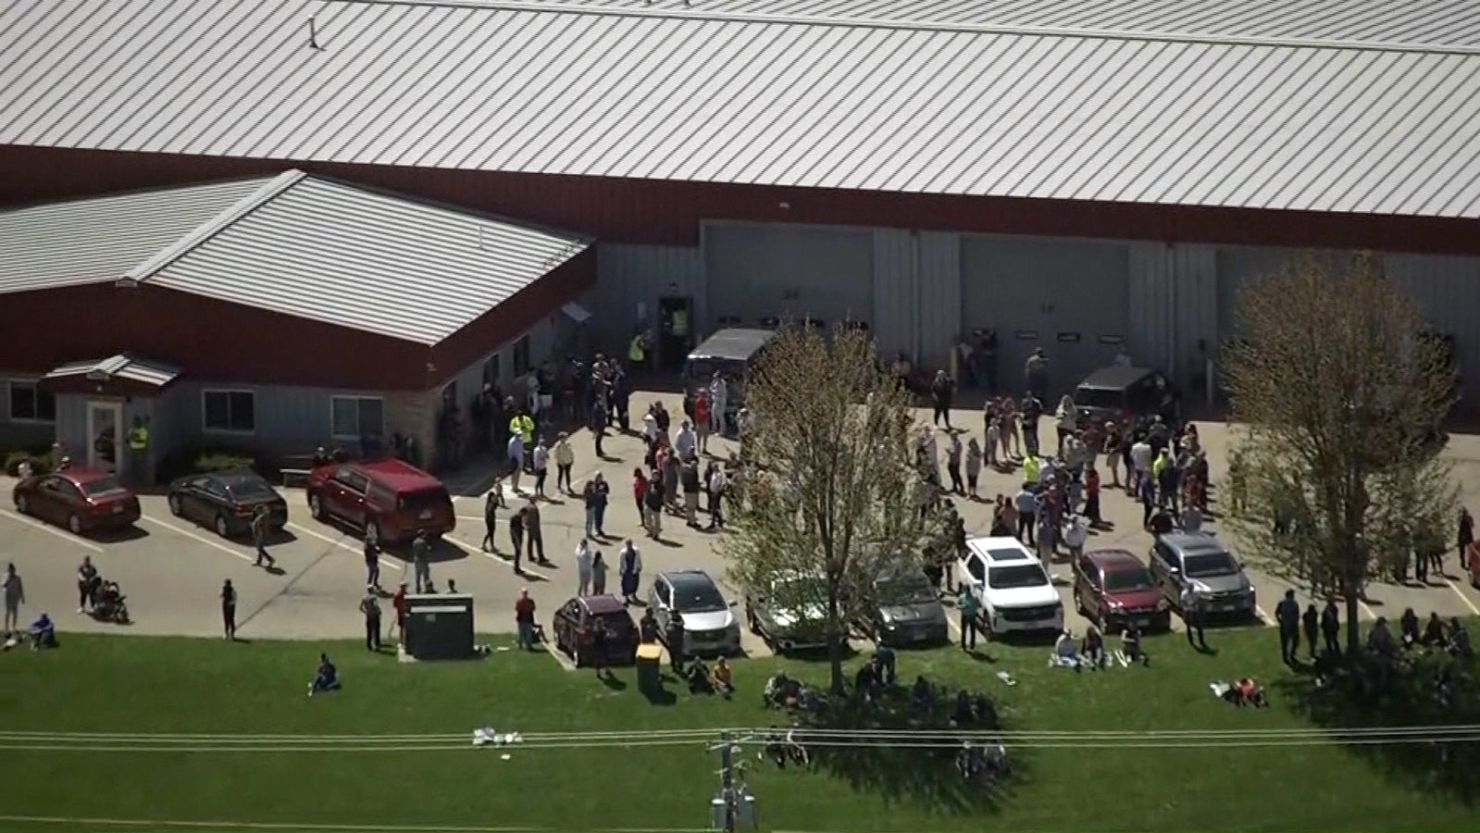 The scene outside a middle school in Mount Horeb, Wisconsin, on Wednesday morning, after police used “deadly force” after a student brought a weapon near the school.